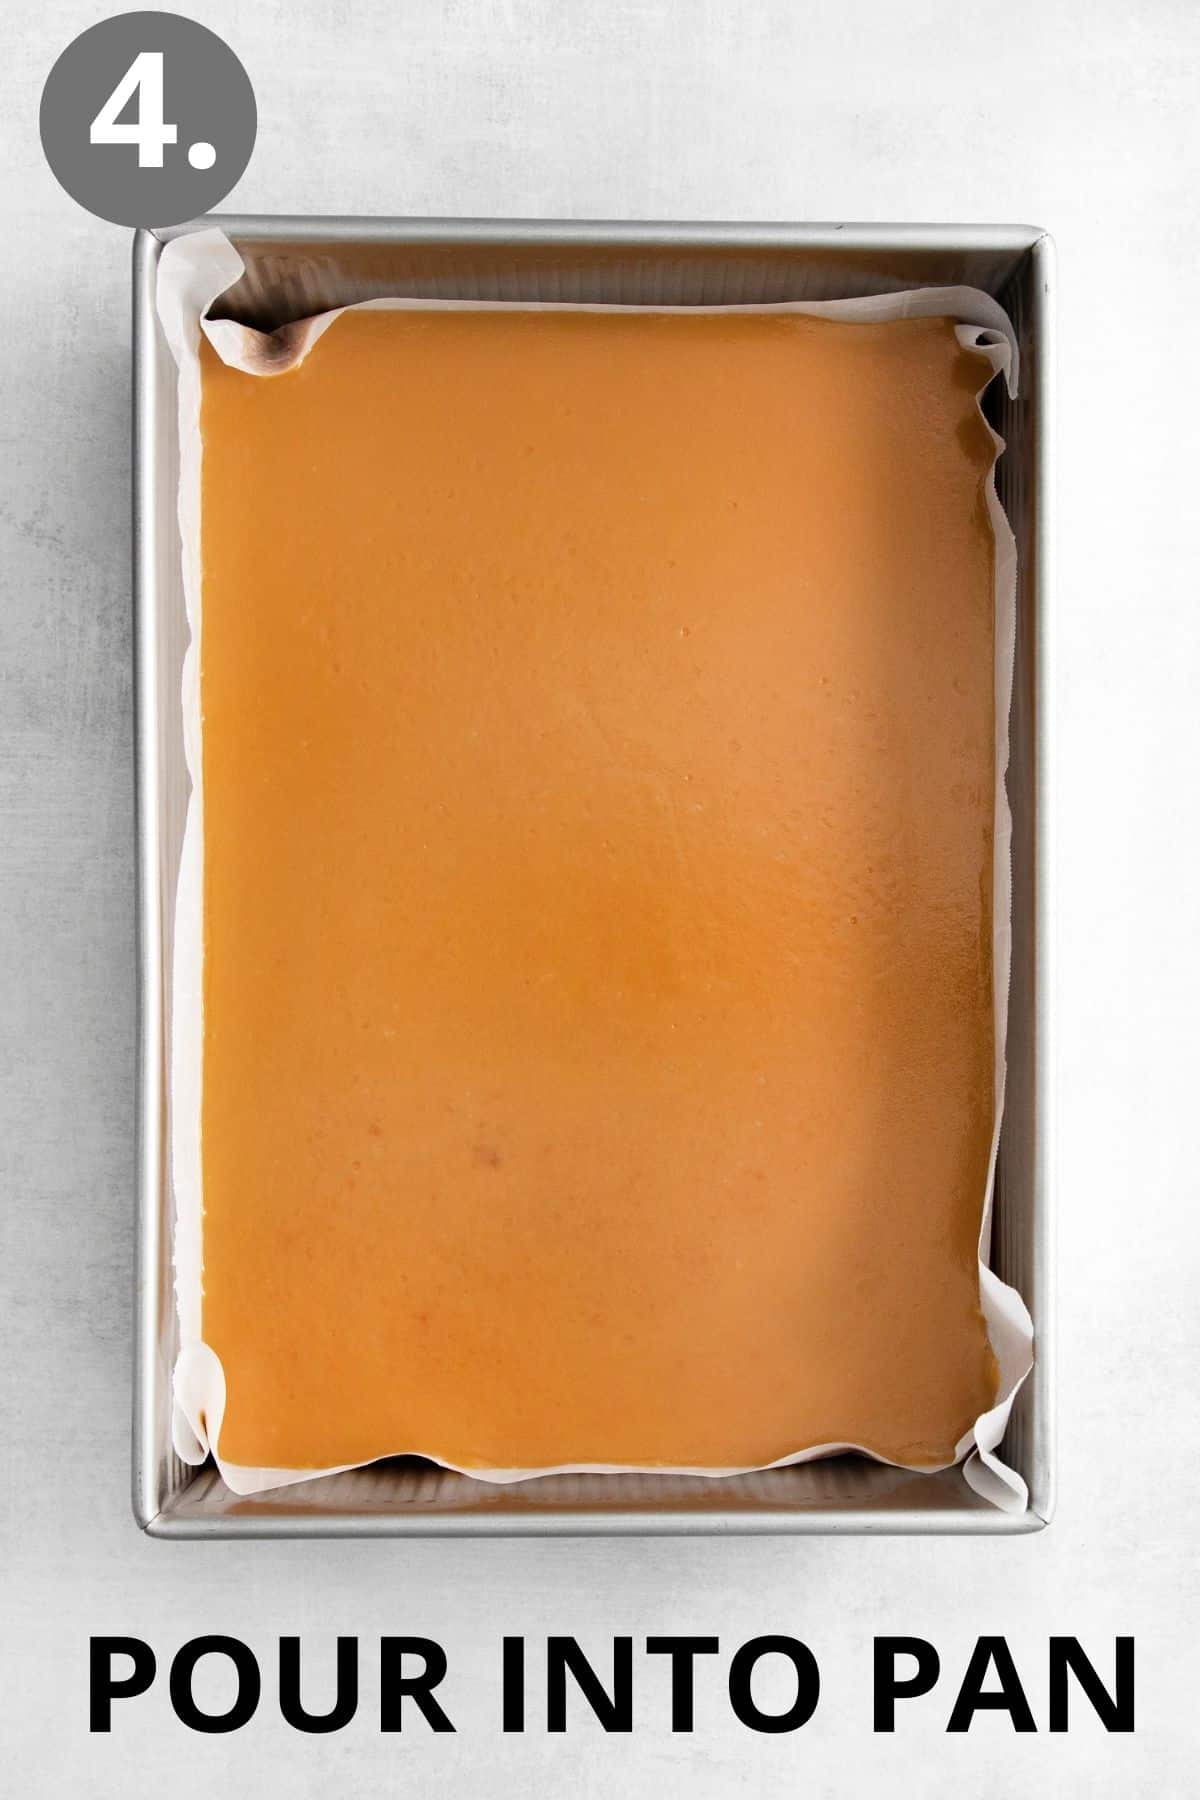 Carmels poured in a lined pan